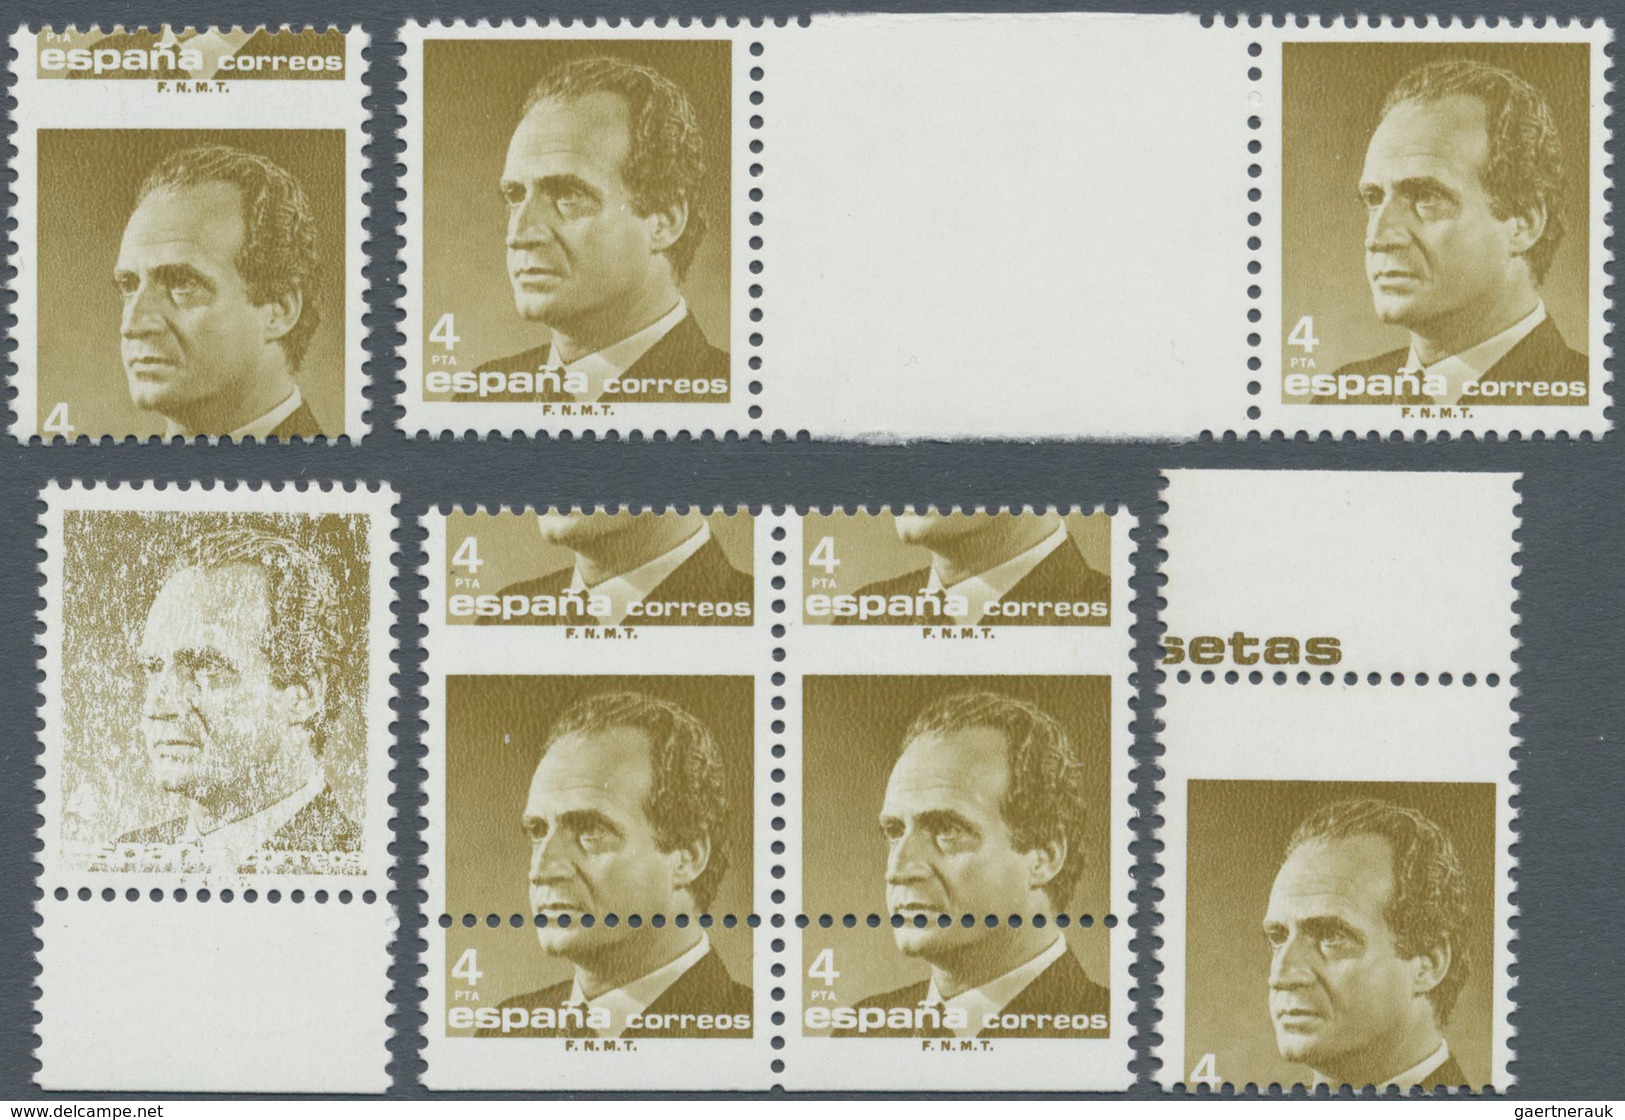 Spanien: 1986, King Juan Carlos I. 4pta. Dark Yellow Olive In A Lot With About 200 Stamps Mostly Wit - Gebraucht